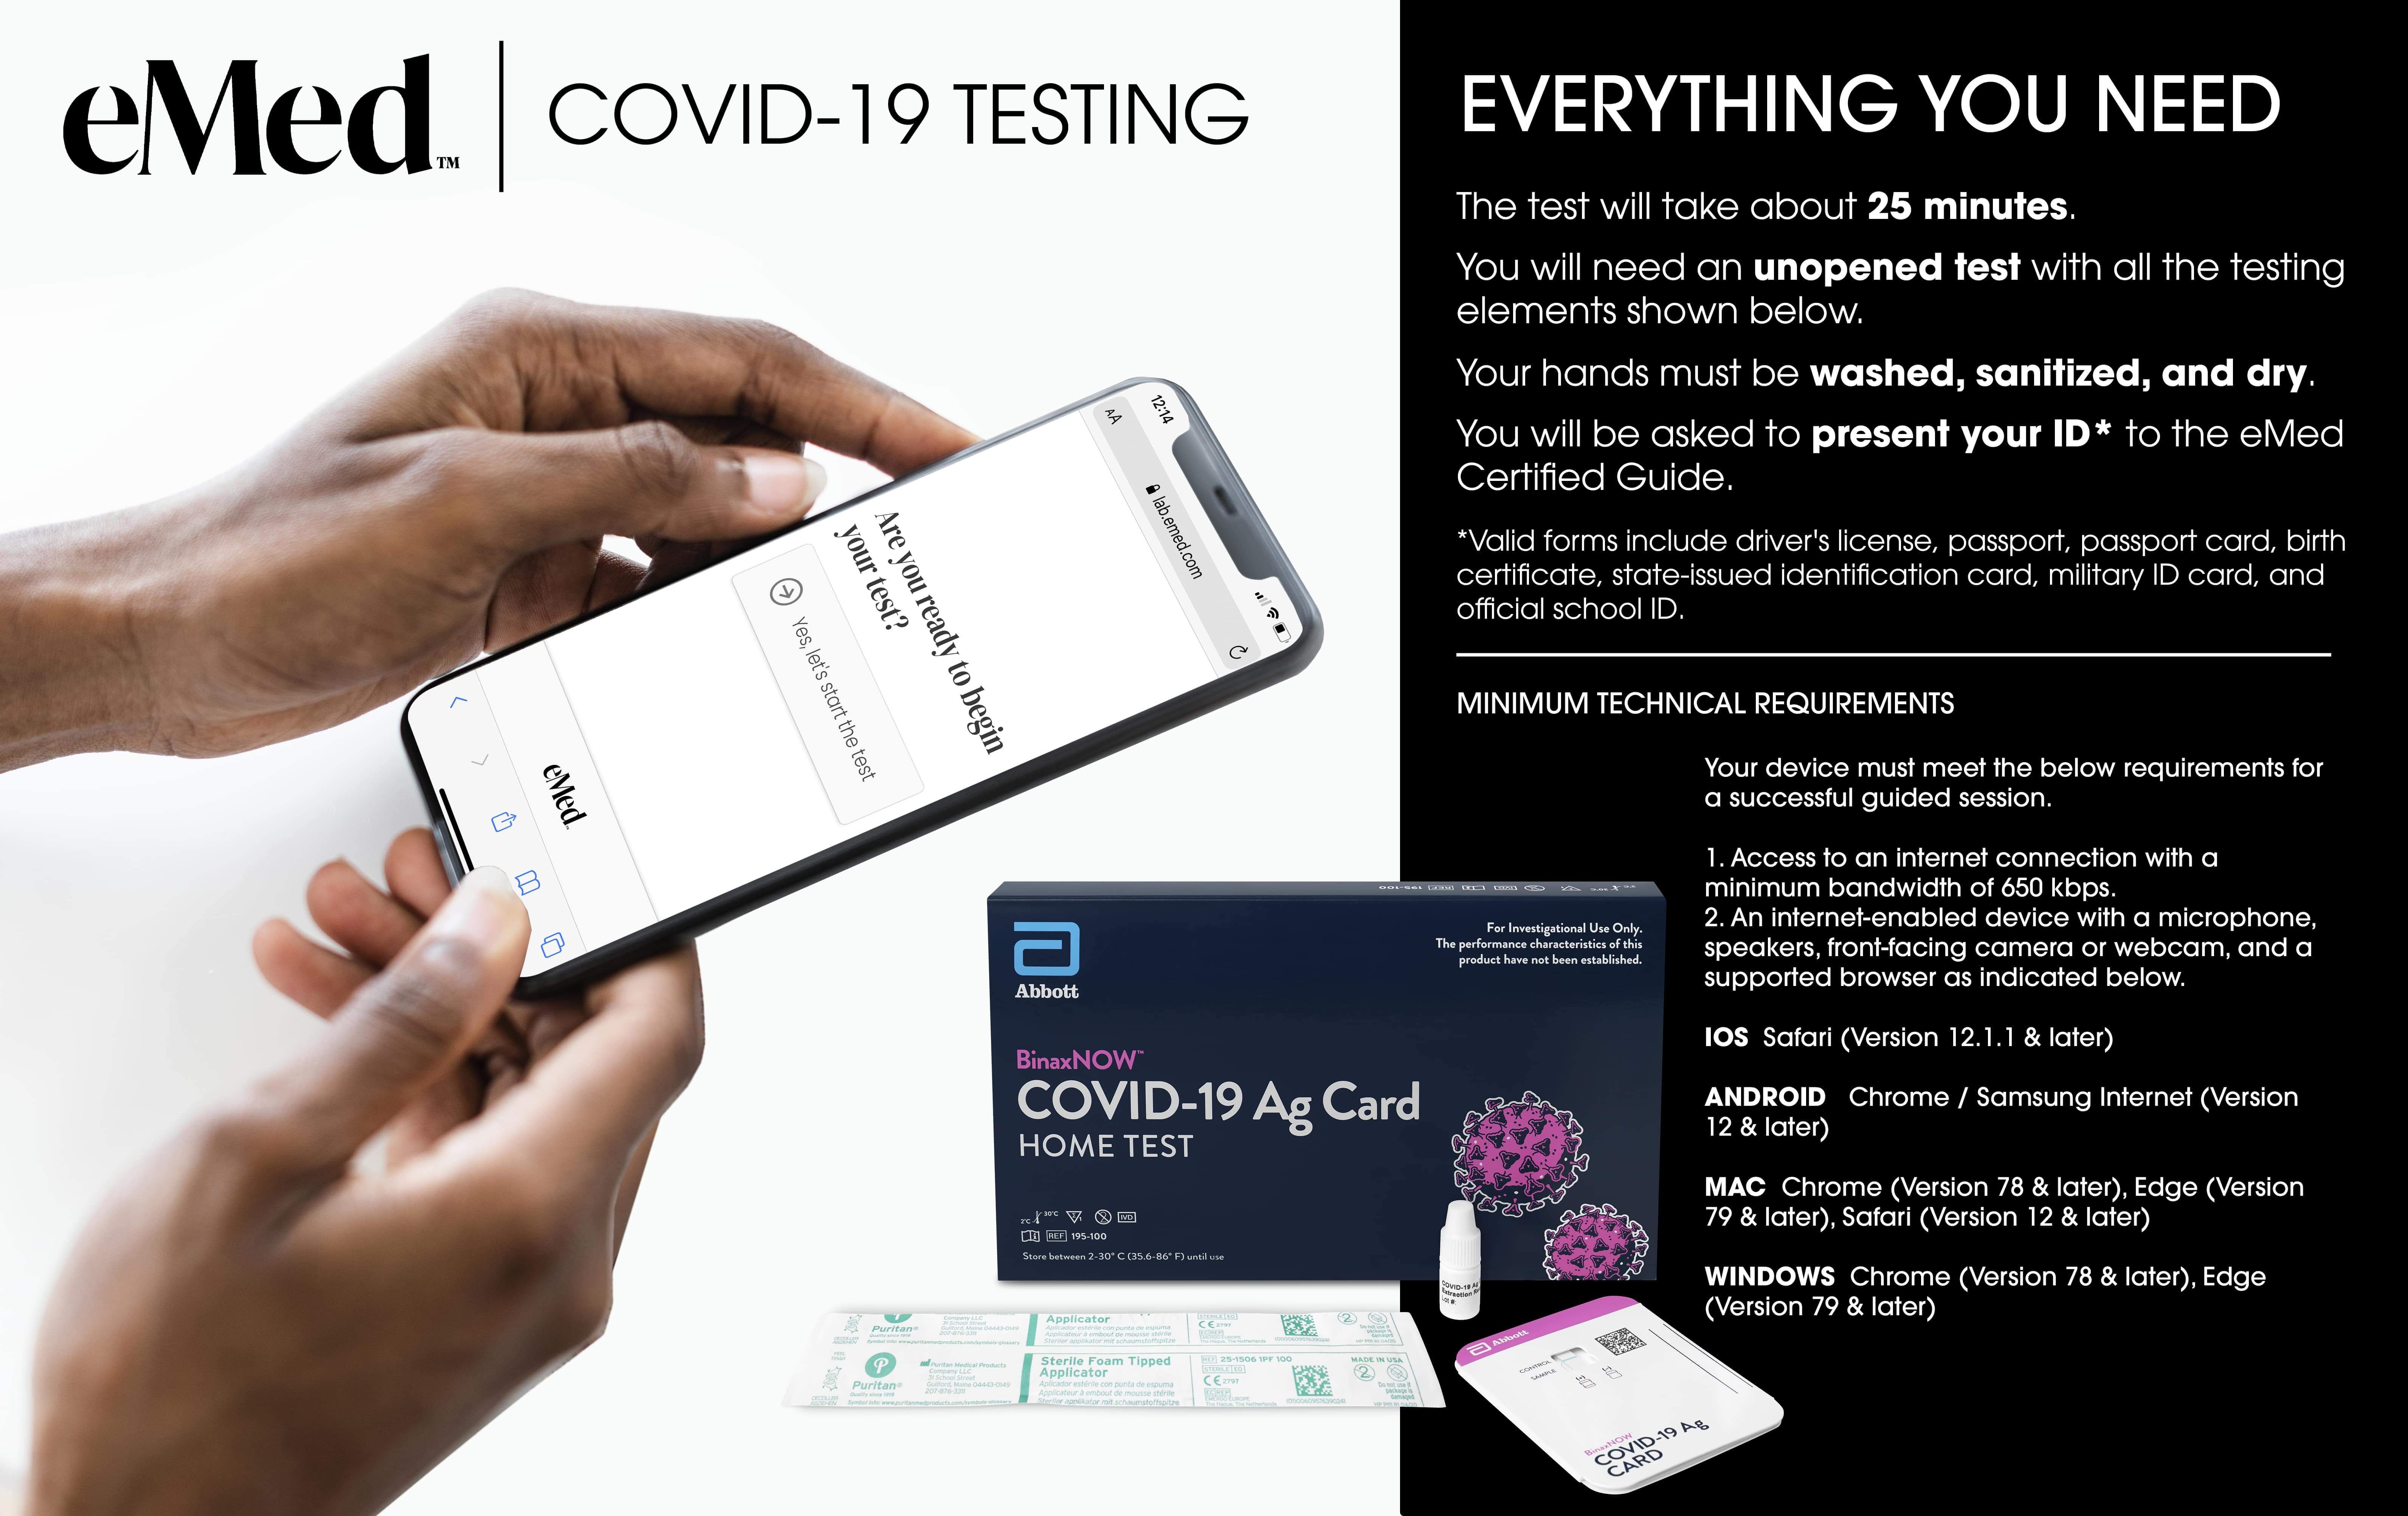 DISCAbbott BinaxNOW™ COVID-19 Ag Card Home Test with eMed Telehealth Services for Travel - 3 Pack